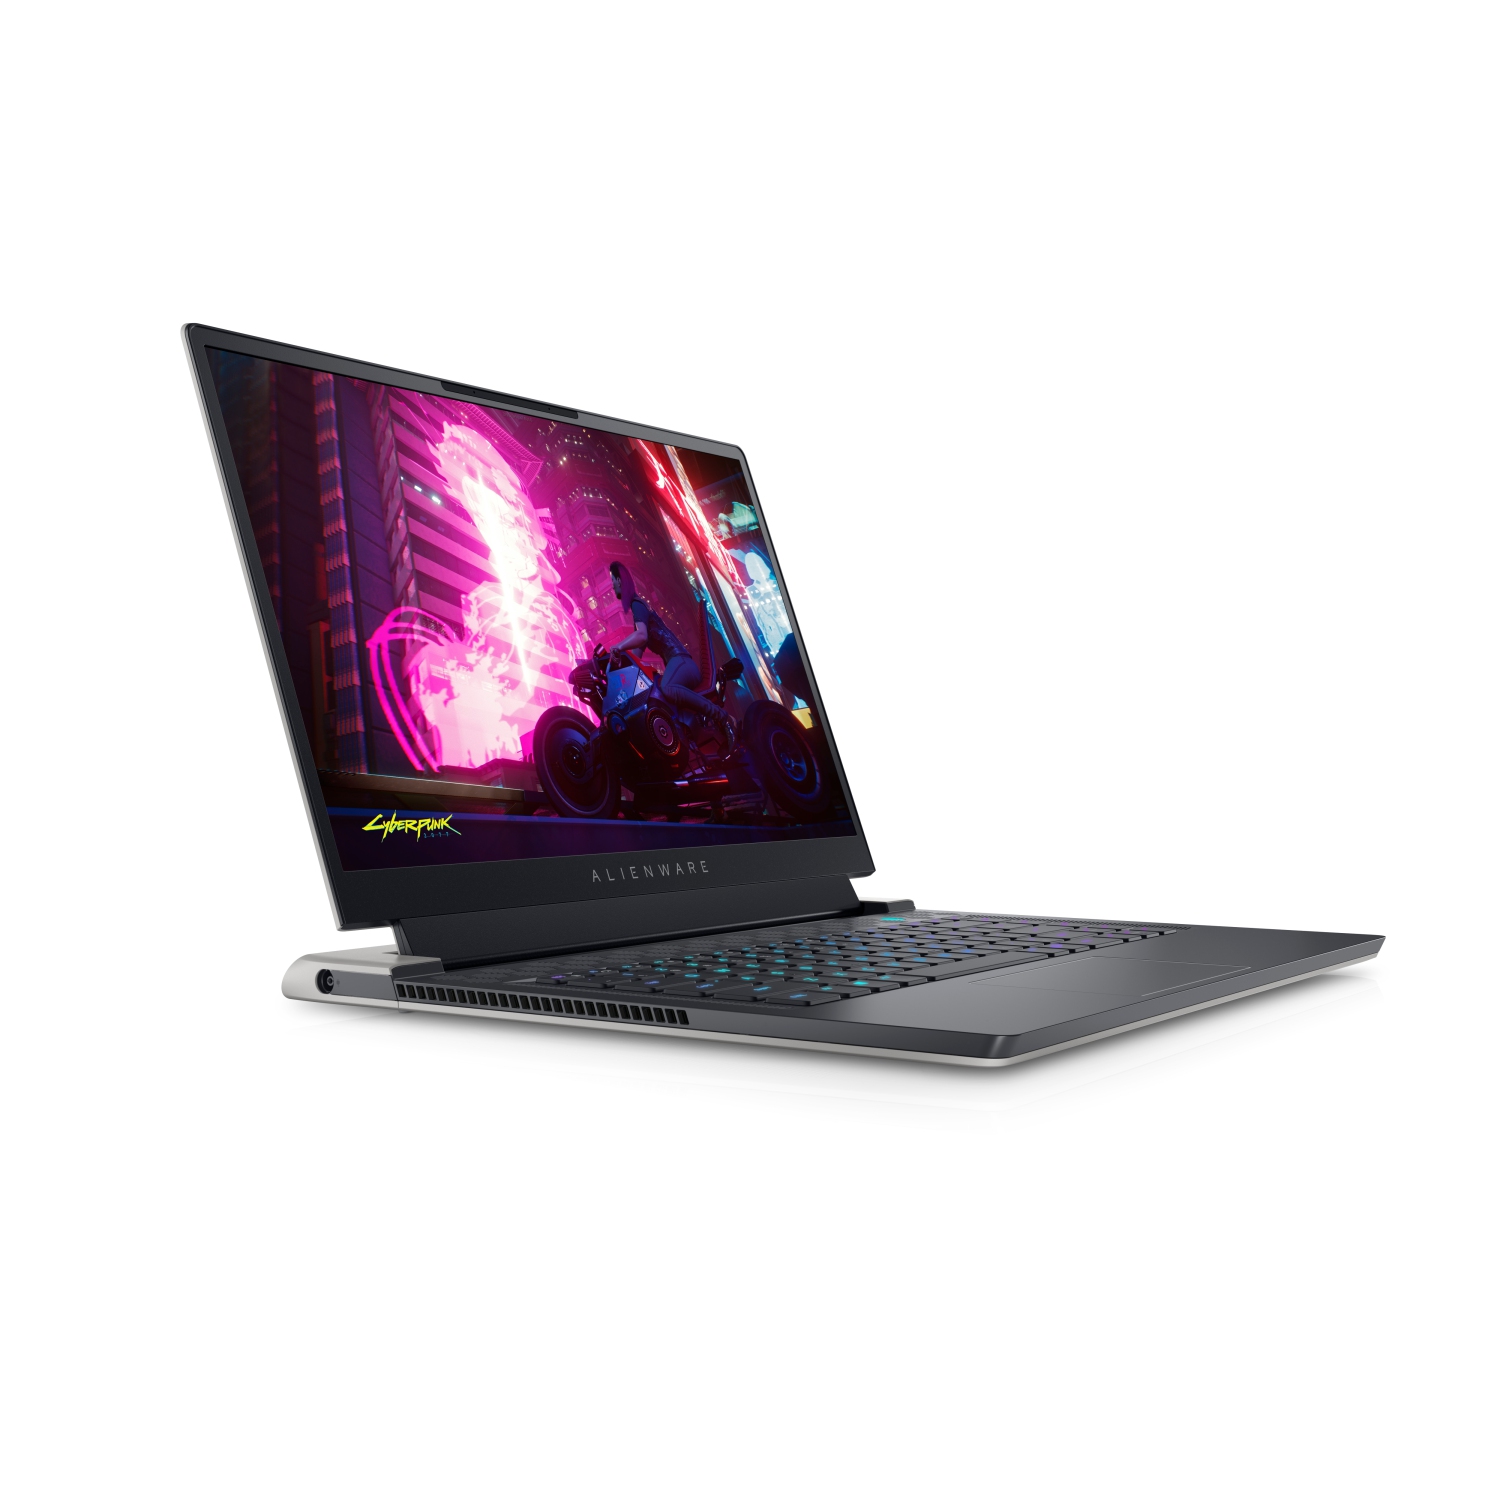 Dell Alienware X15 R1 Gaming Laptop (2021) | 15.6" FHD | Core i7 - 512GB SSD + 512GB SSD - 16GB RAM - RTX 3070 | 8 Cores @ 4.6 GHz - 11th Gen CPU - 8GB GDDR6 Certified Refurbished